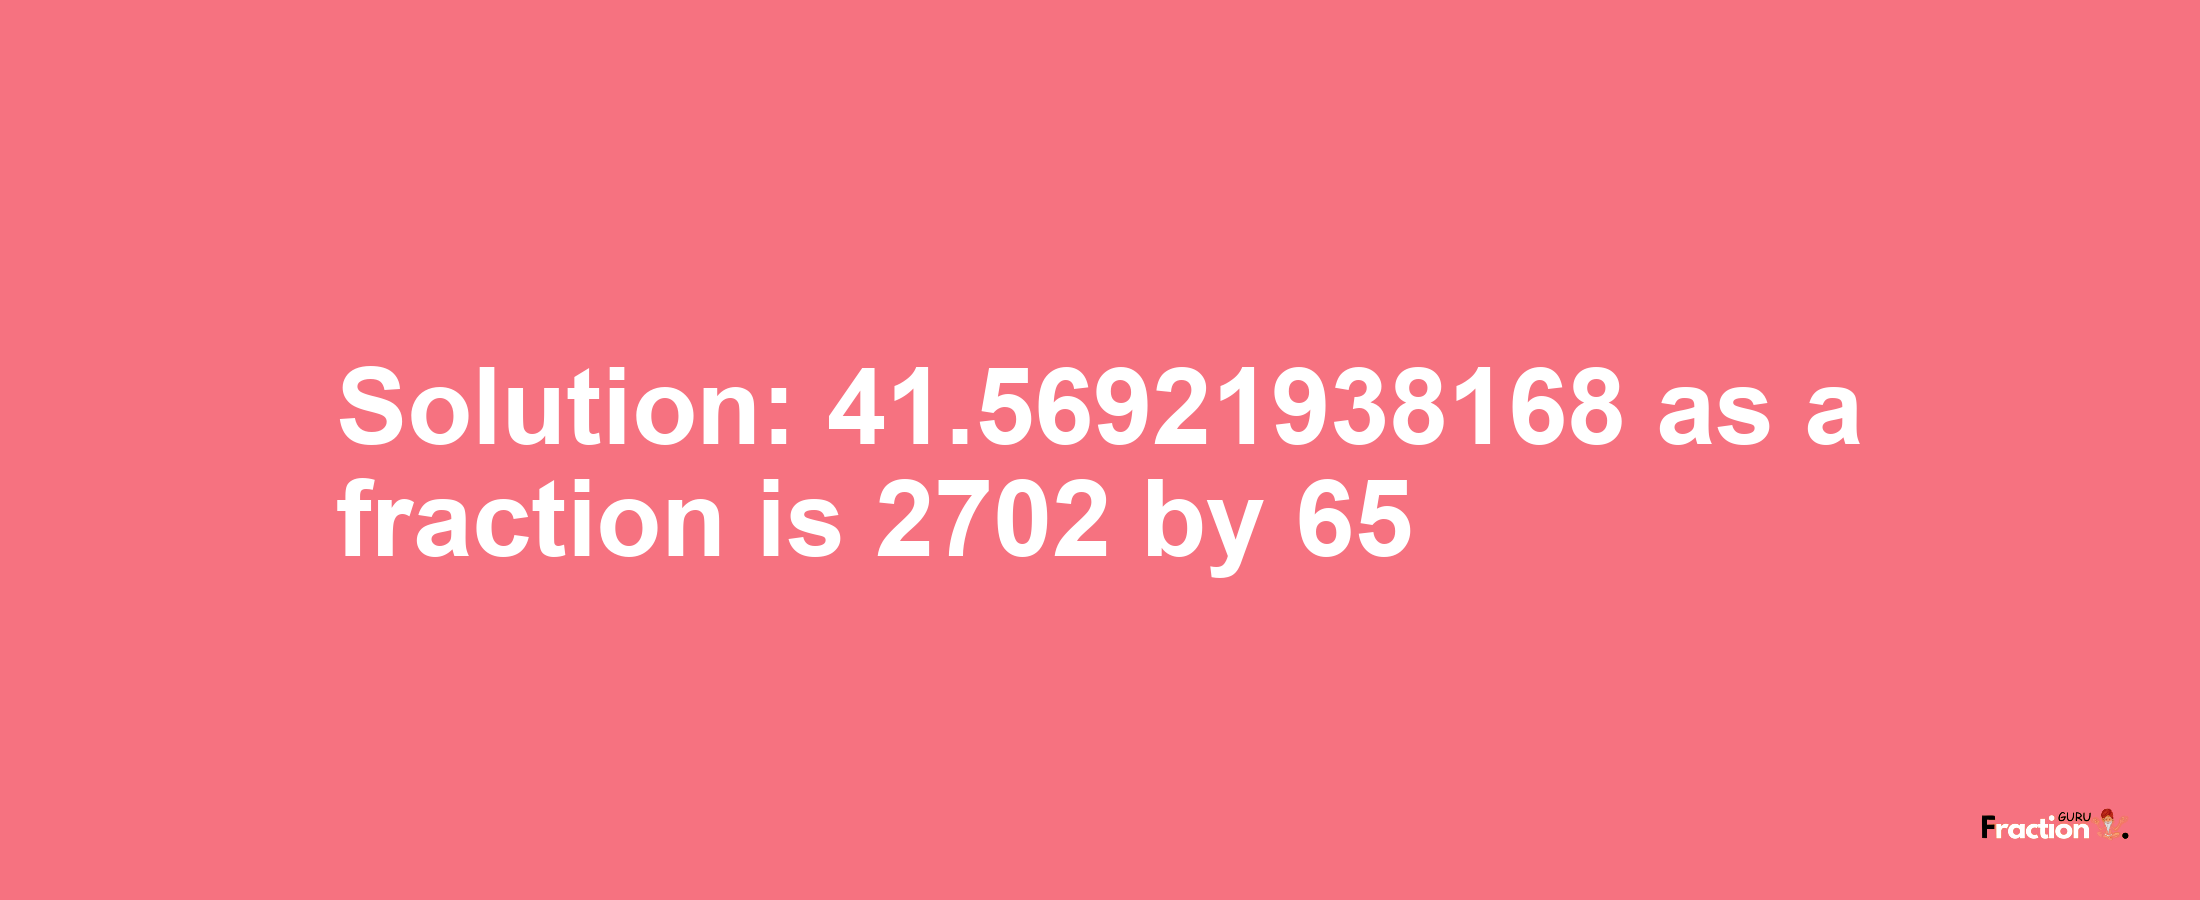 Solution:41.56921938168 as a fraction is 2702/65